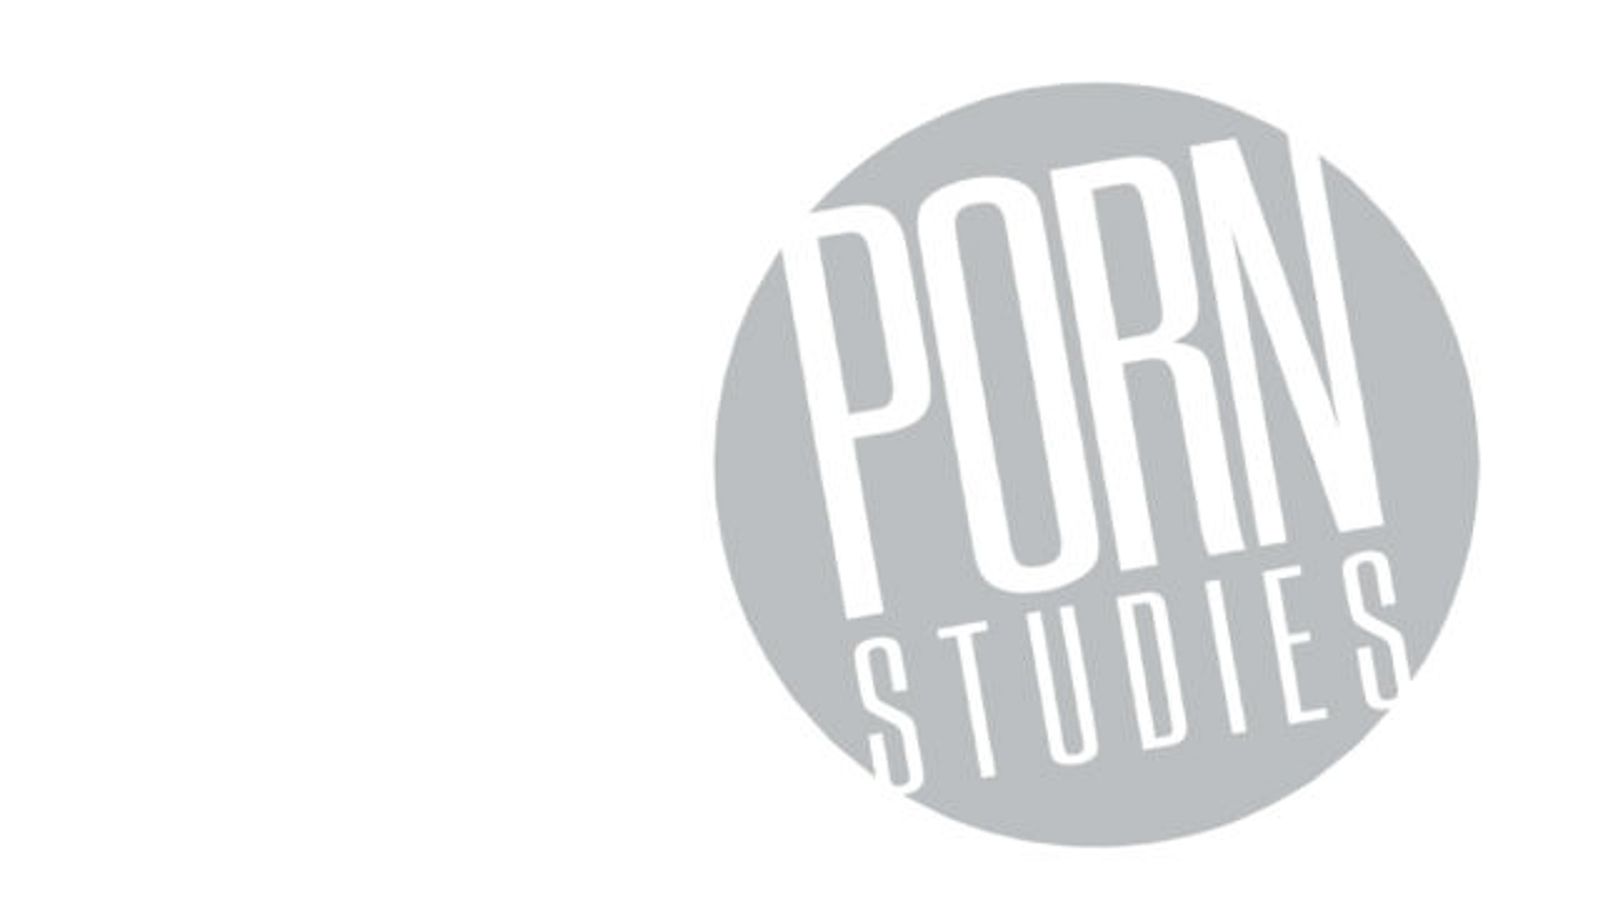 Scholarly Journal 'Porn Studies' Launched Today